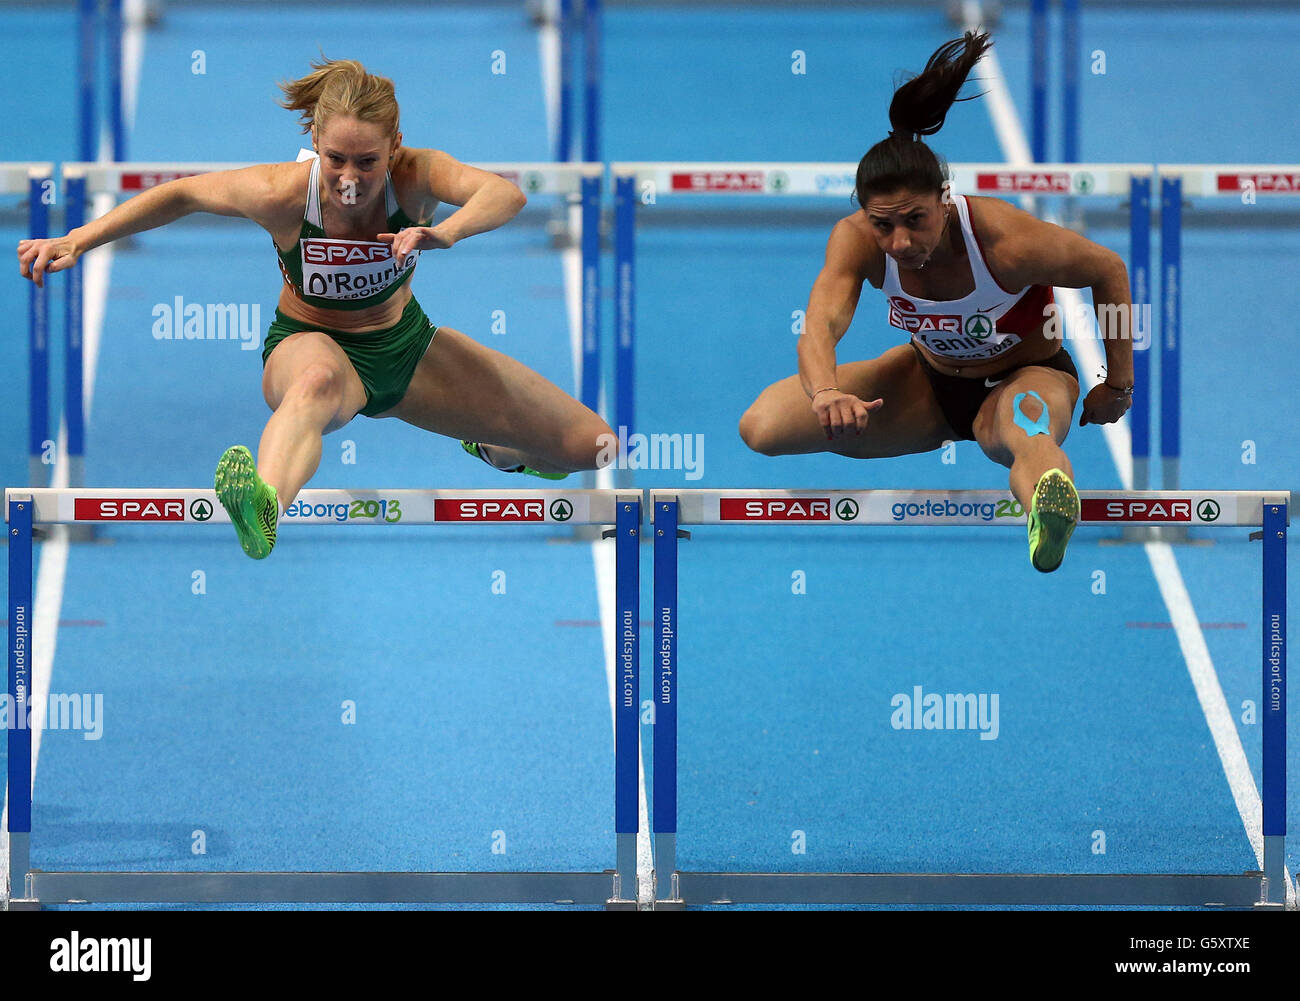 Ireland's Derval O'Rourke (left) competes with Turkey's Nevin Yanit in the womens 60metre hurdles first round during day one of the European Indoor Championships at the Scandinavium Arena, Gothenburg, Sweden. Stock Photo